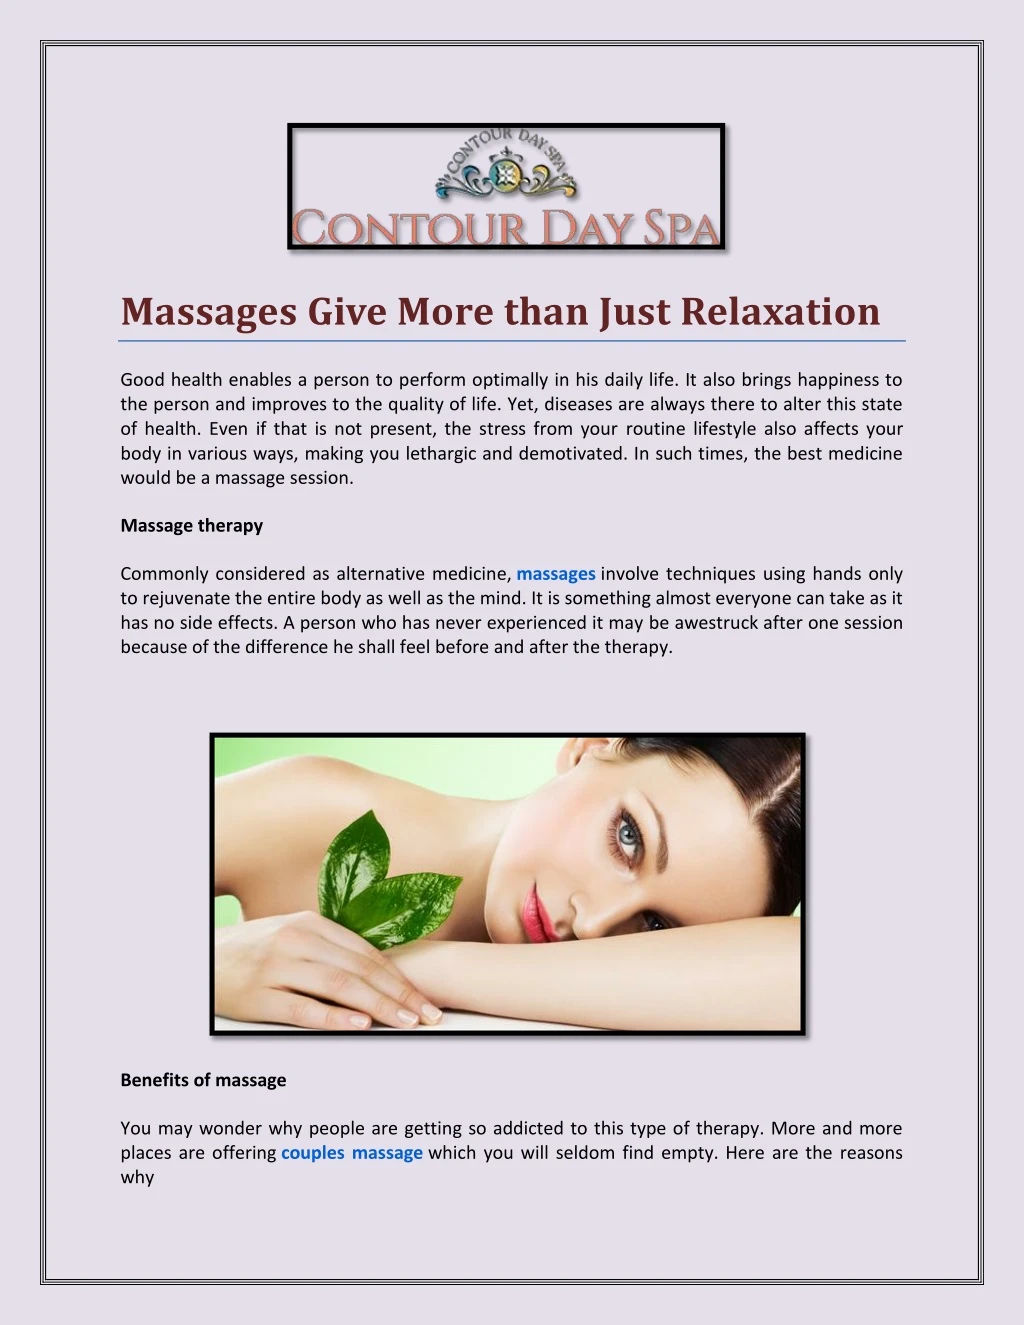 massages give more than just relaxation